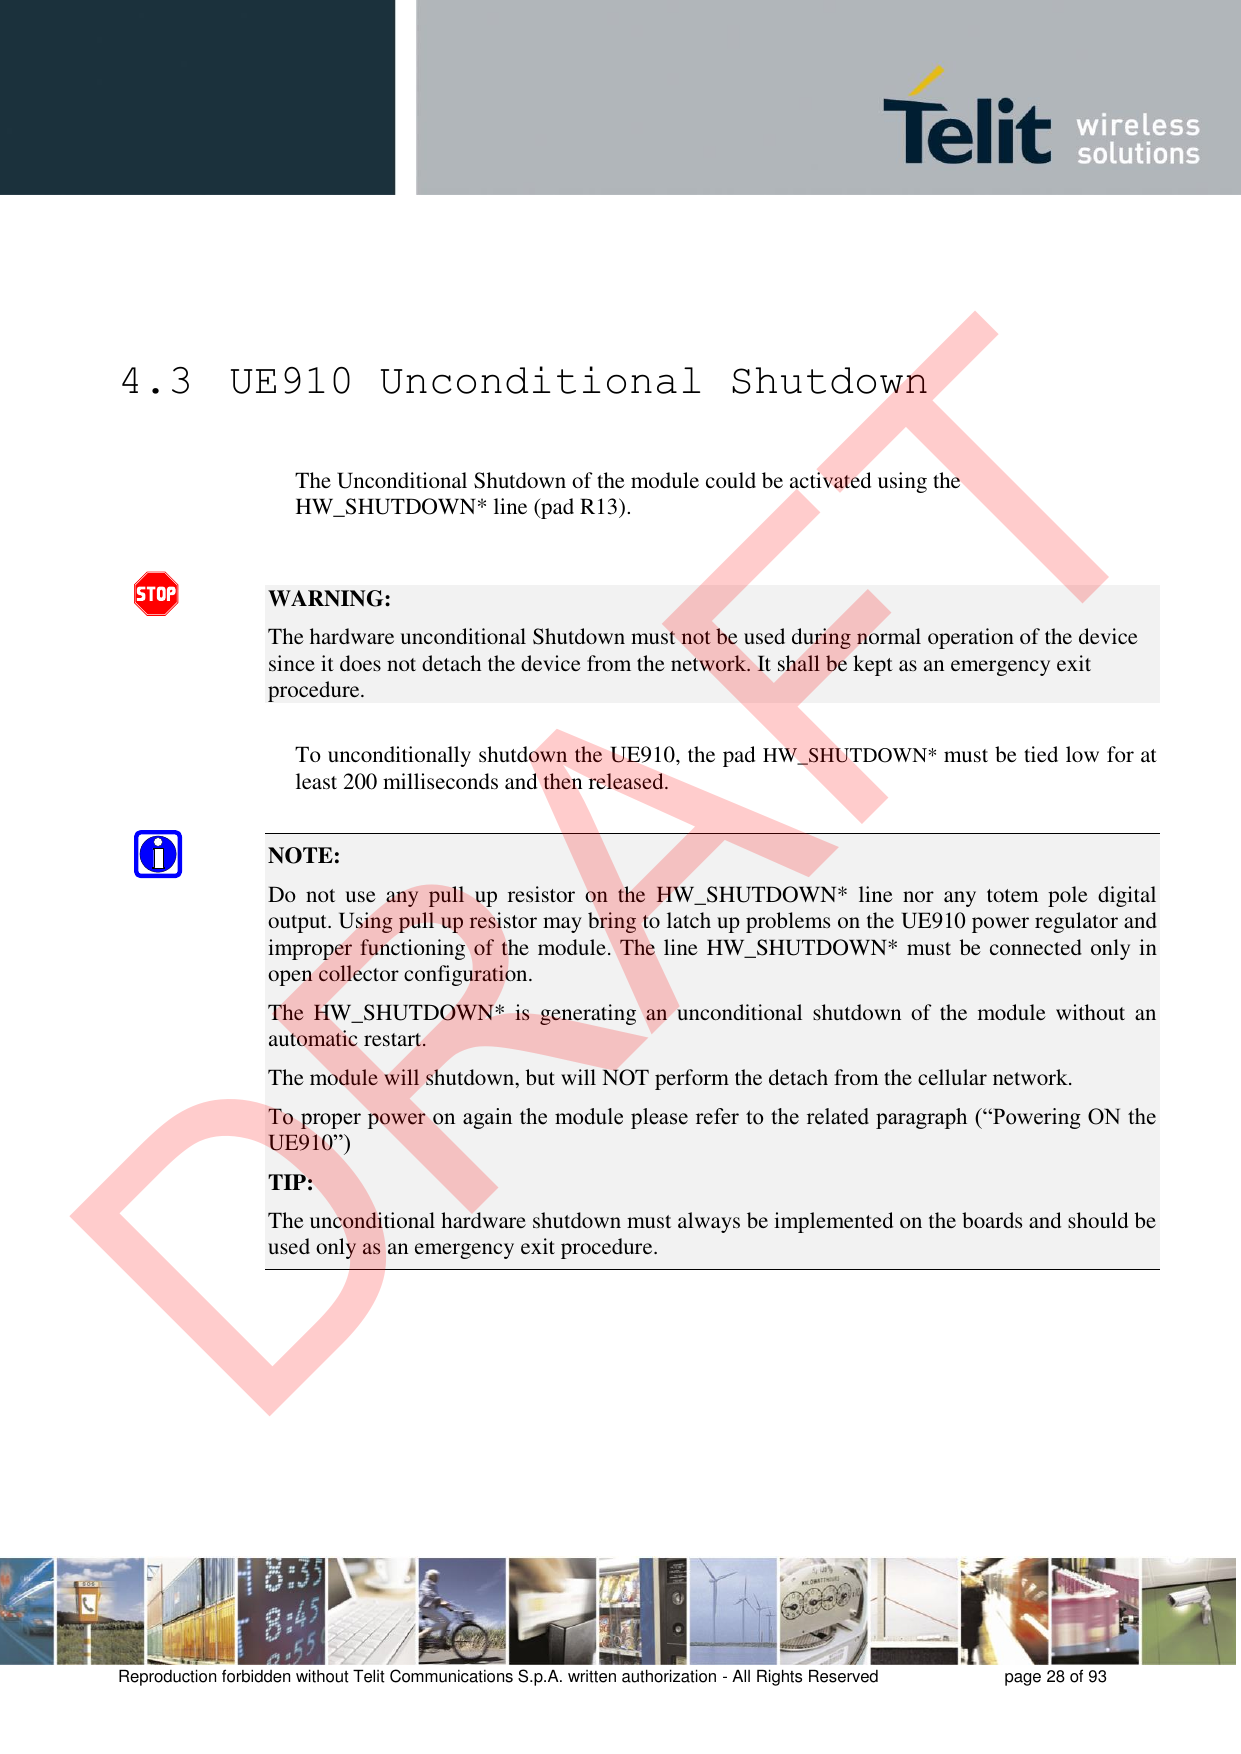 Reproduction forbidden without Telit Communications S.p.A. written authorization - All Rights Reserved  page 28 of 93 4.3  UE910 Unconditional Shutdown The Unconditional Shutdown of the module could be activated using the HW_SHUTDOWN* line (pad R13). WARNING: The hardware unconditional Shutdown must not be used during normal operation of the device since it does not detach the device from the network. It shall be kept as an emergency exit procedure. To unconditionally shutdown the UE910, the pad HW_SHUTDOWN* must be tied low for at least 200 milliseconds and then released. NOTE: Do  not  use  any  pull  up  resistor  on  the  HW_SHUTDOWN*  line  nor  any  totem  pole  digital output. Using pull up resistor may bring to latch up problems on the UE910 power regulator and improper functioning of the module. The line HW_SHUTDOWN* must be connected only in open collector configuration. The  HW_SHUTDOWN*  is  generating  an  unconditional  shutdown  of  the module  without  an automatic restart. The module will shutdown, but will NOT perform the detach from the cellular network. To proper power on again the module please refer to the related paragraph (“Powering ON the UE910”) TIP: The unconditional hardware shutdown must always be implemented on the boards and should be used only as an emergency exit procedure. DRAFT